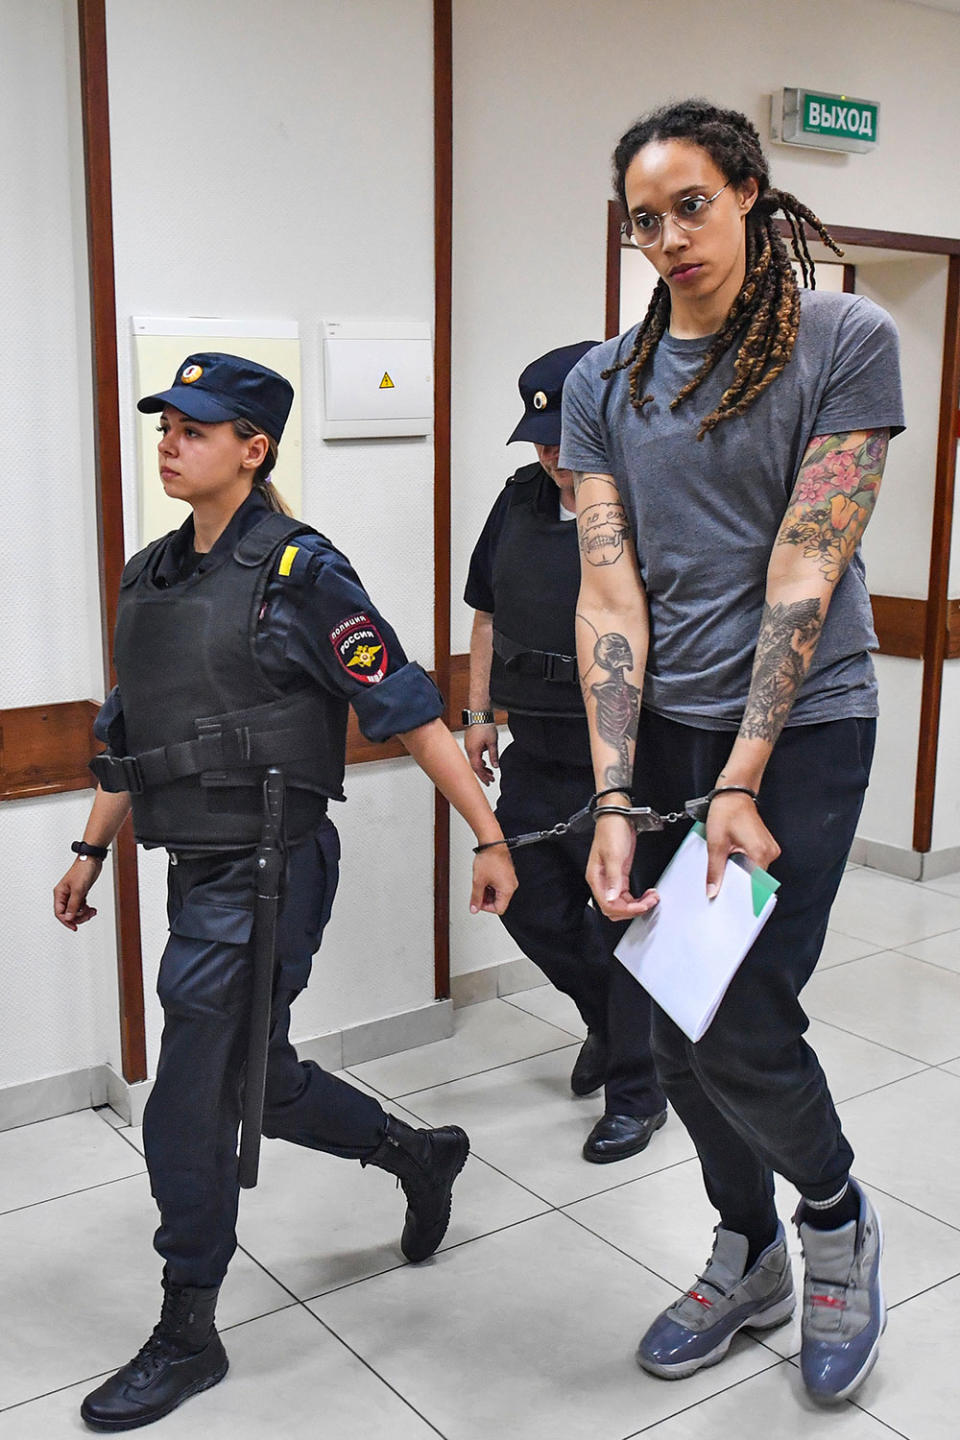 Brittney Griner Is Sentenced to Prison in Russia